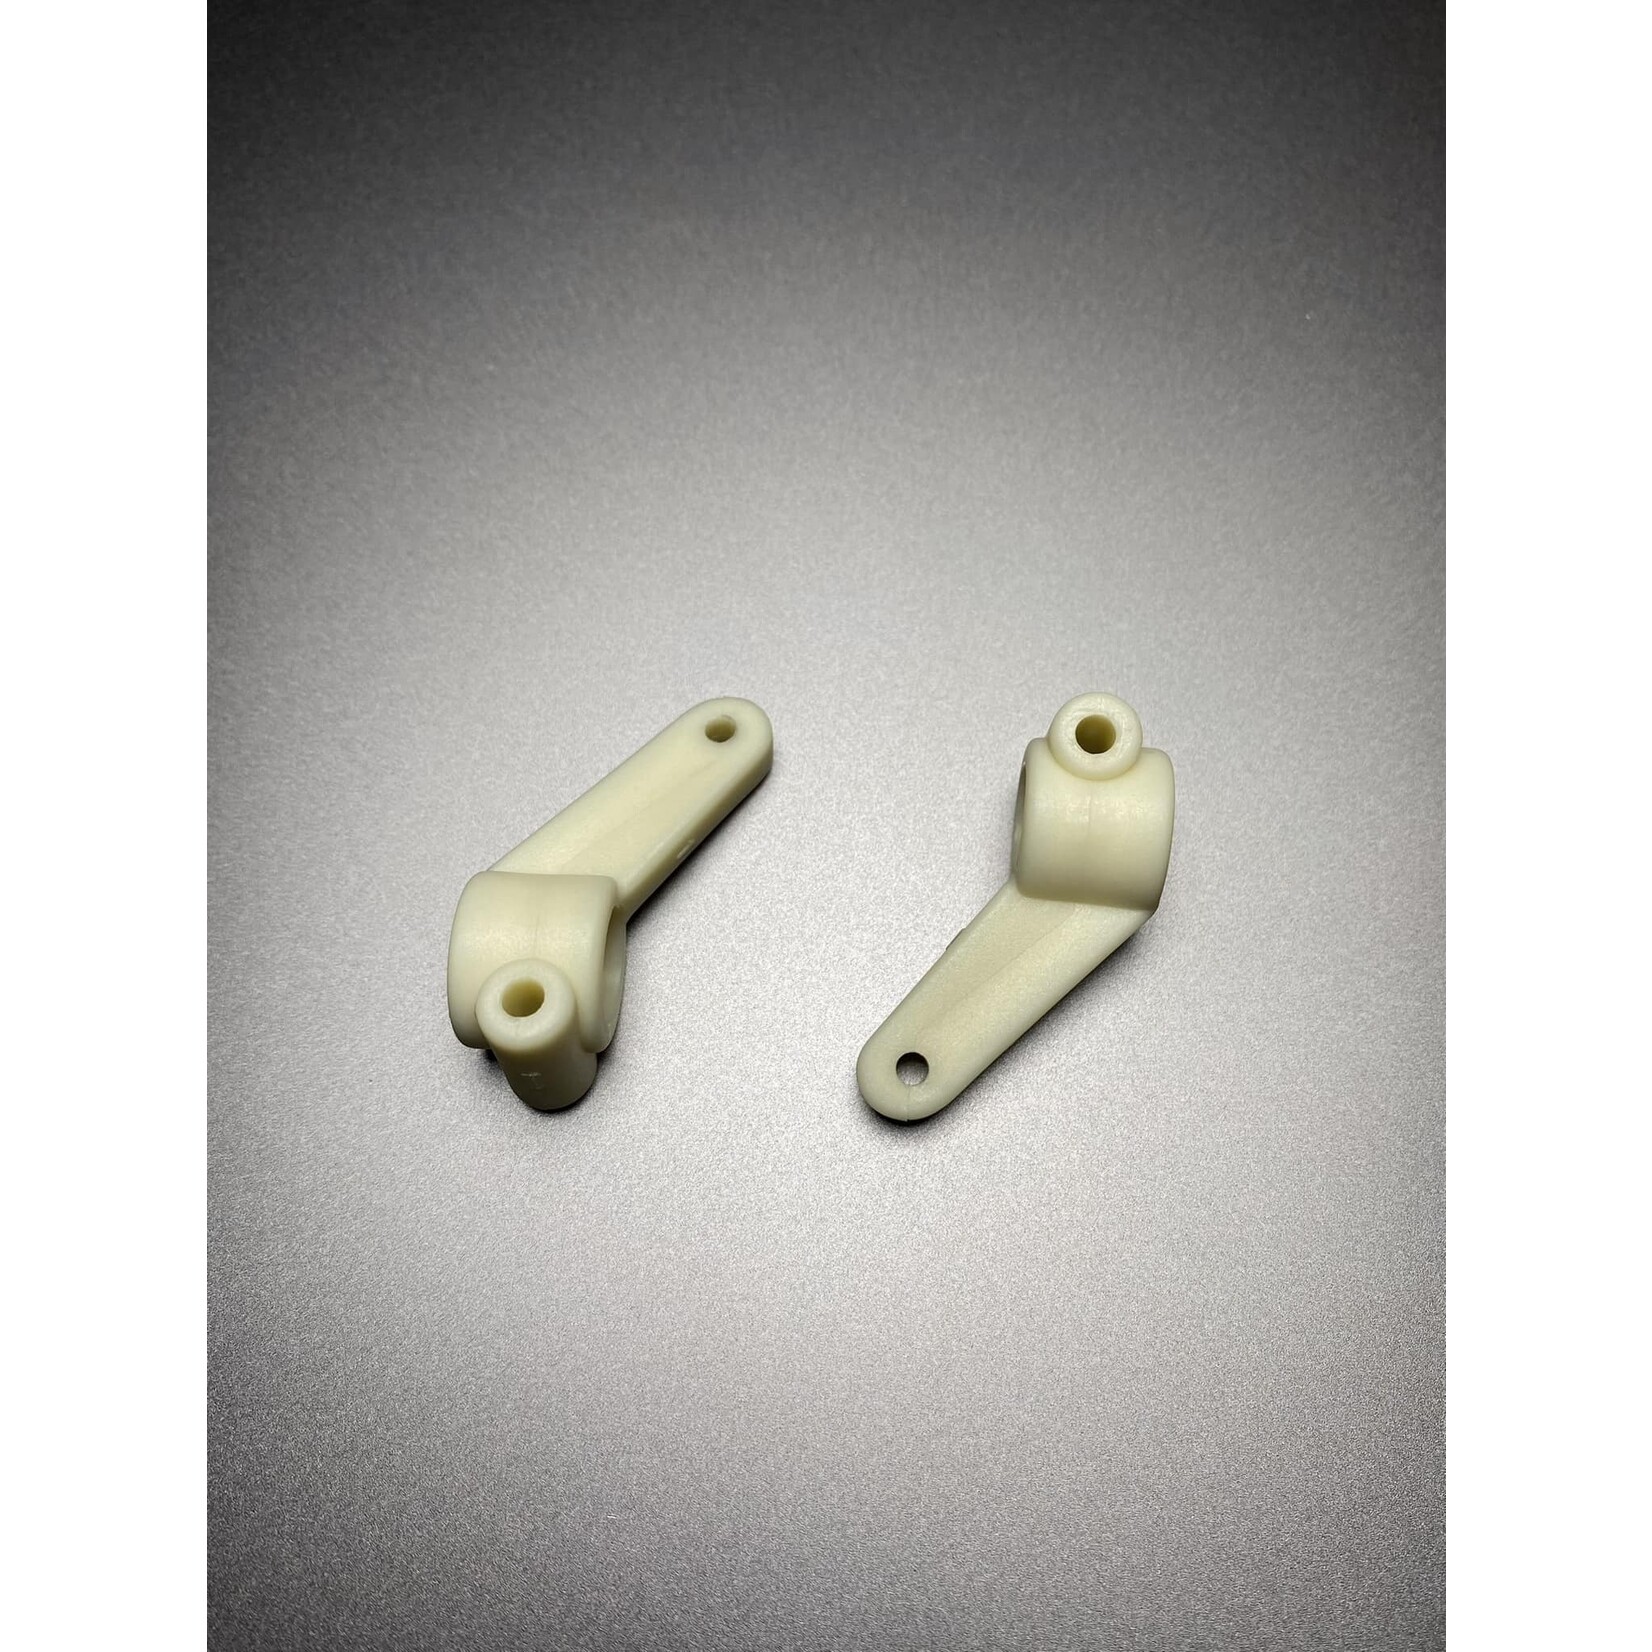 Fan RC FR-0009 FanRC Knuckle Worlds Style 0 Toe In, White Fits RC10